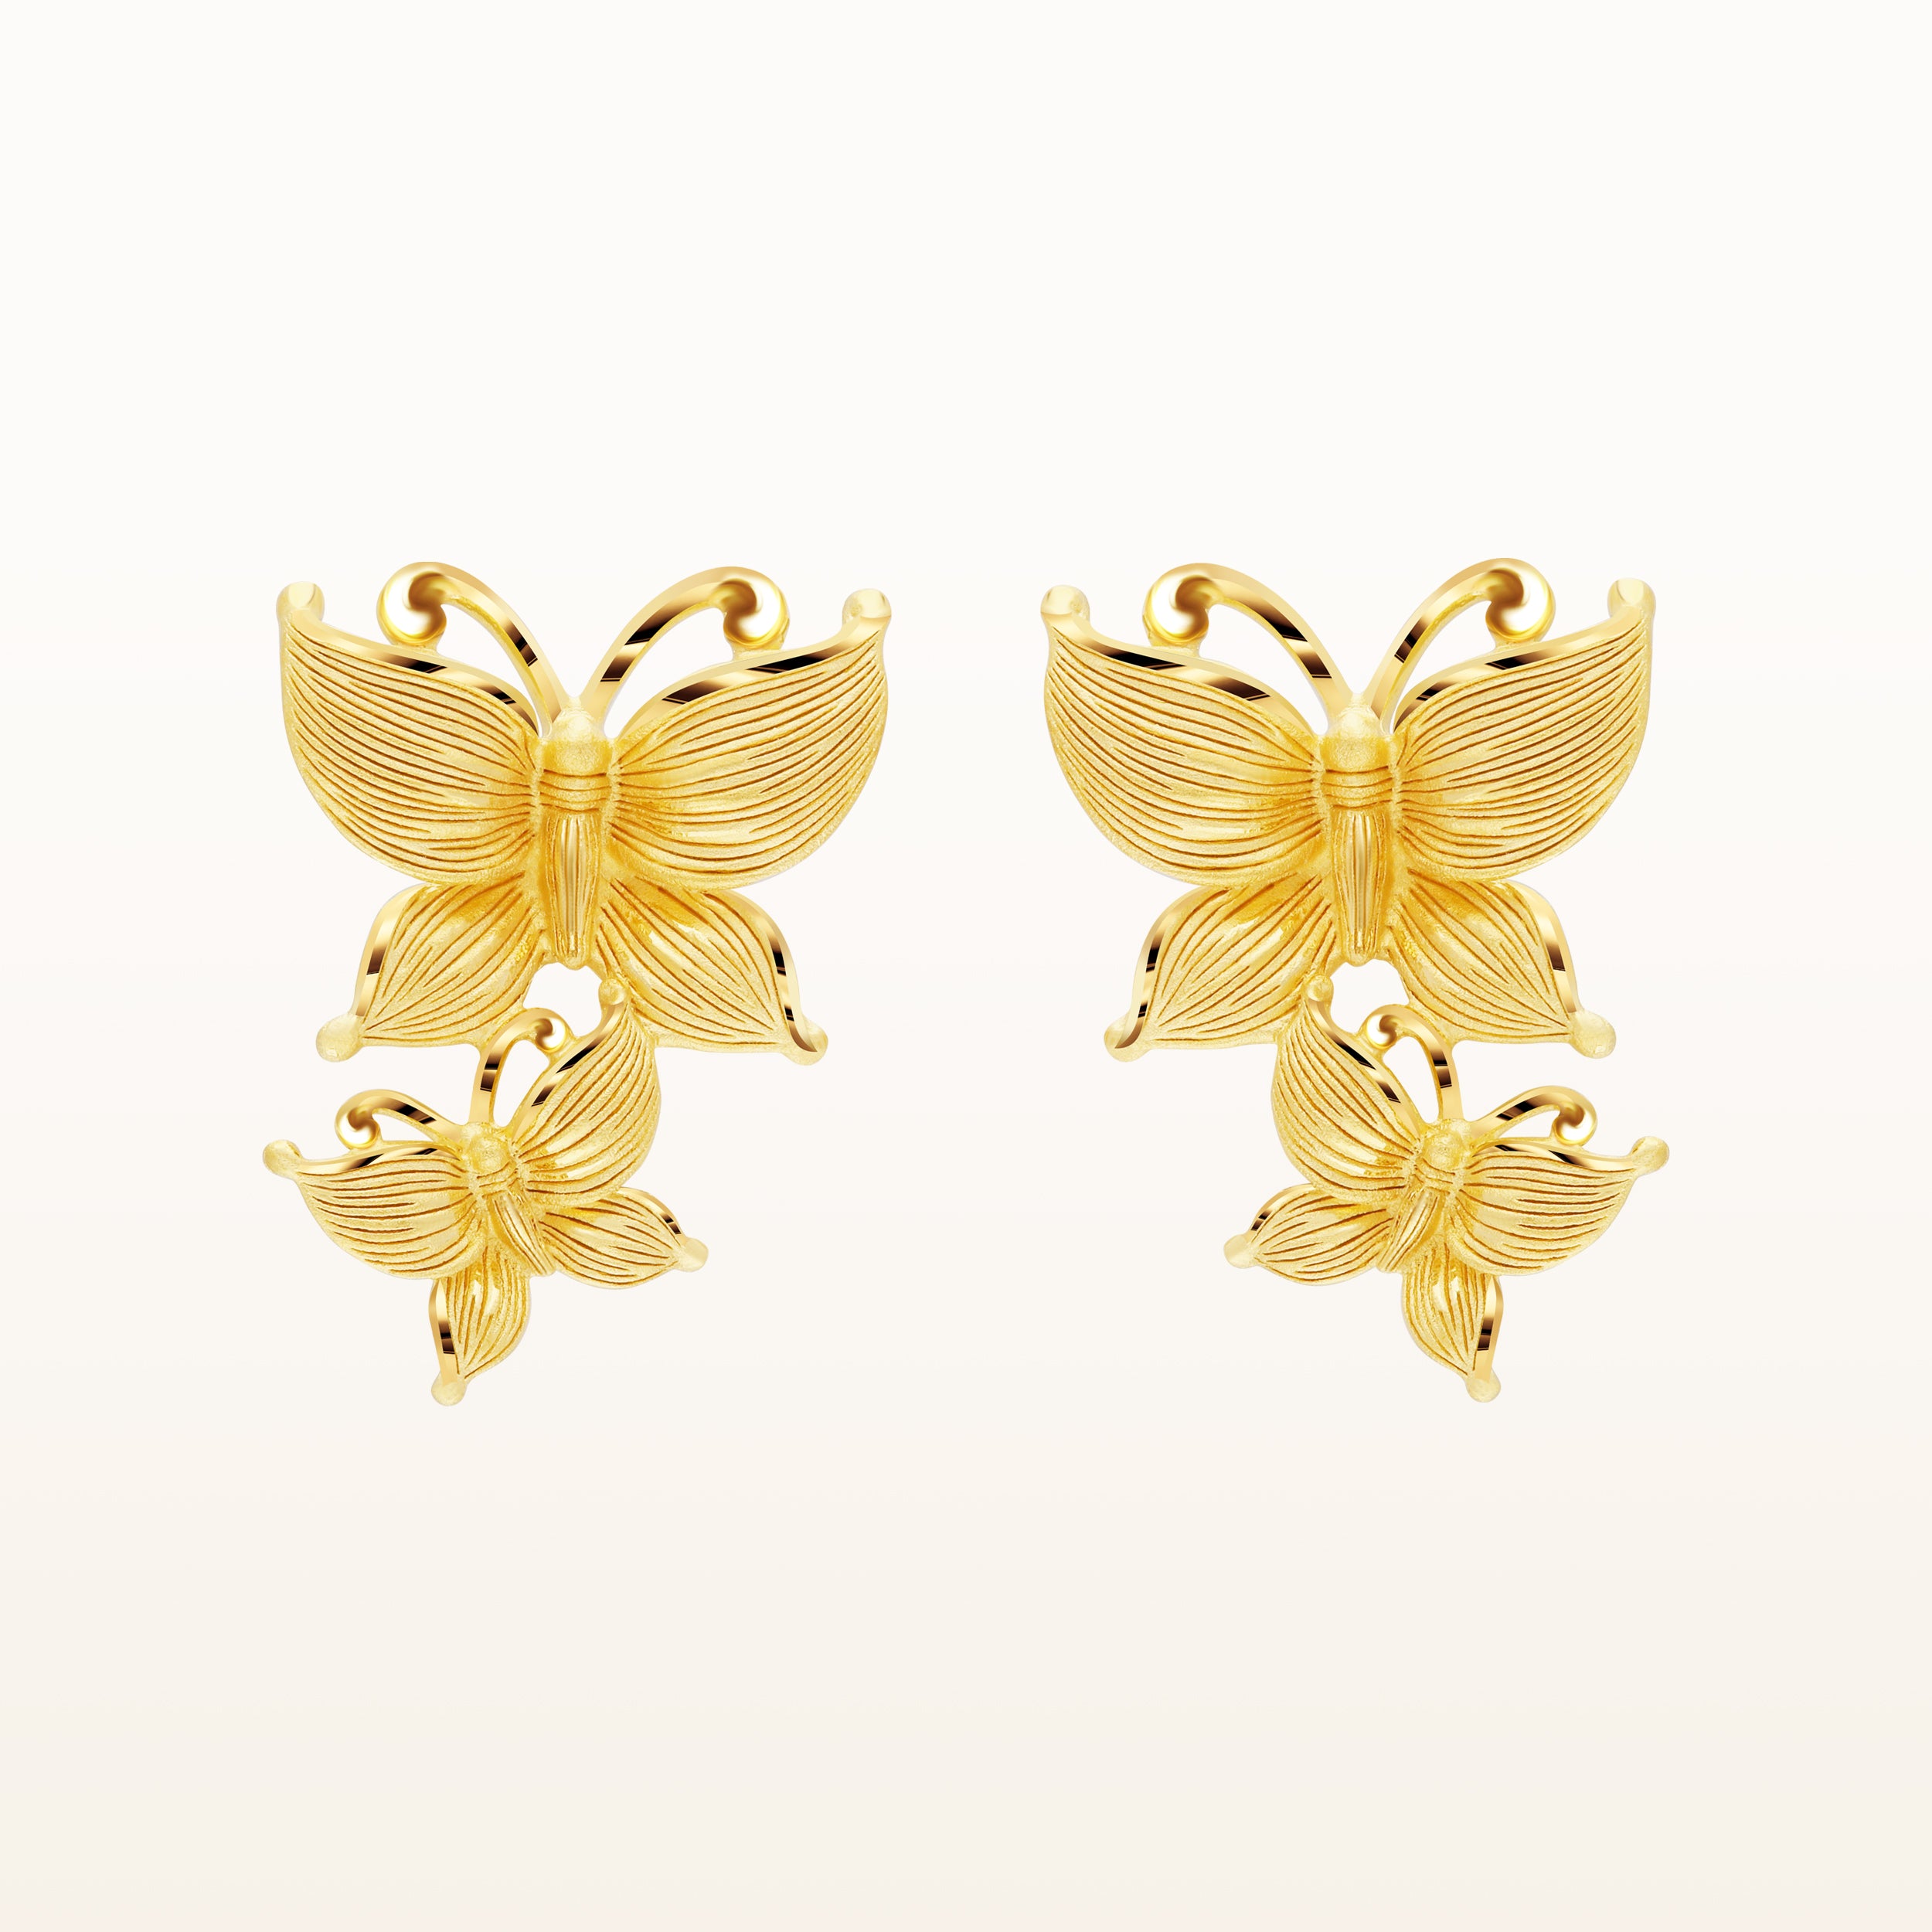 Update more than 254 gold butterfly earrings best